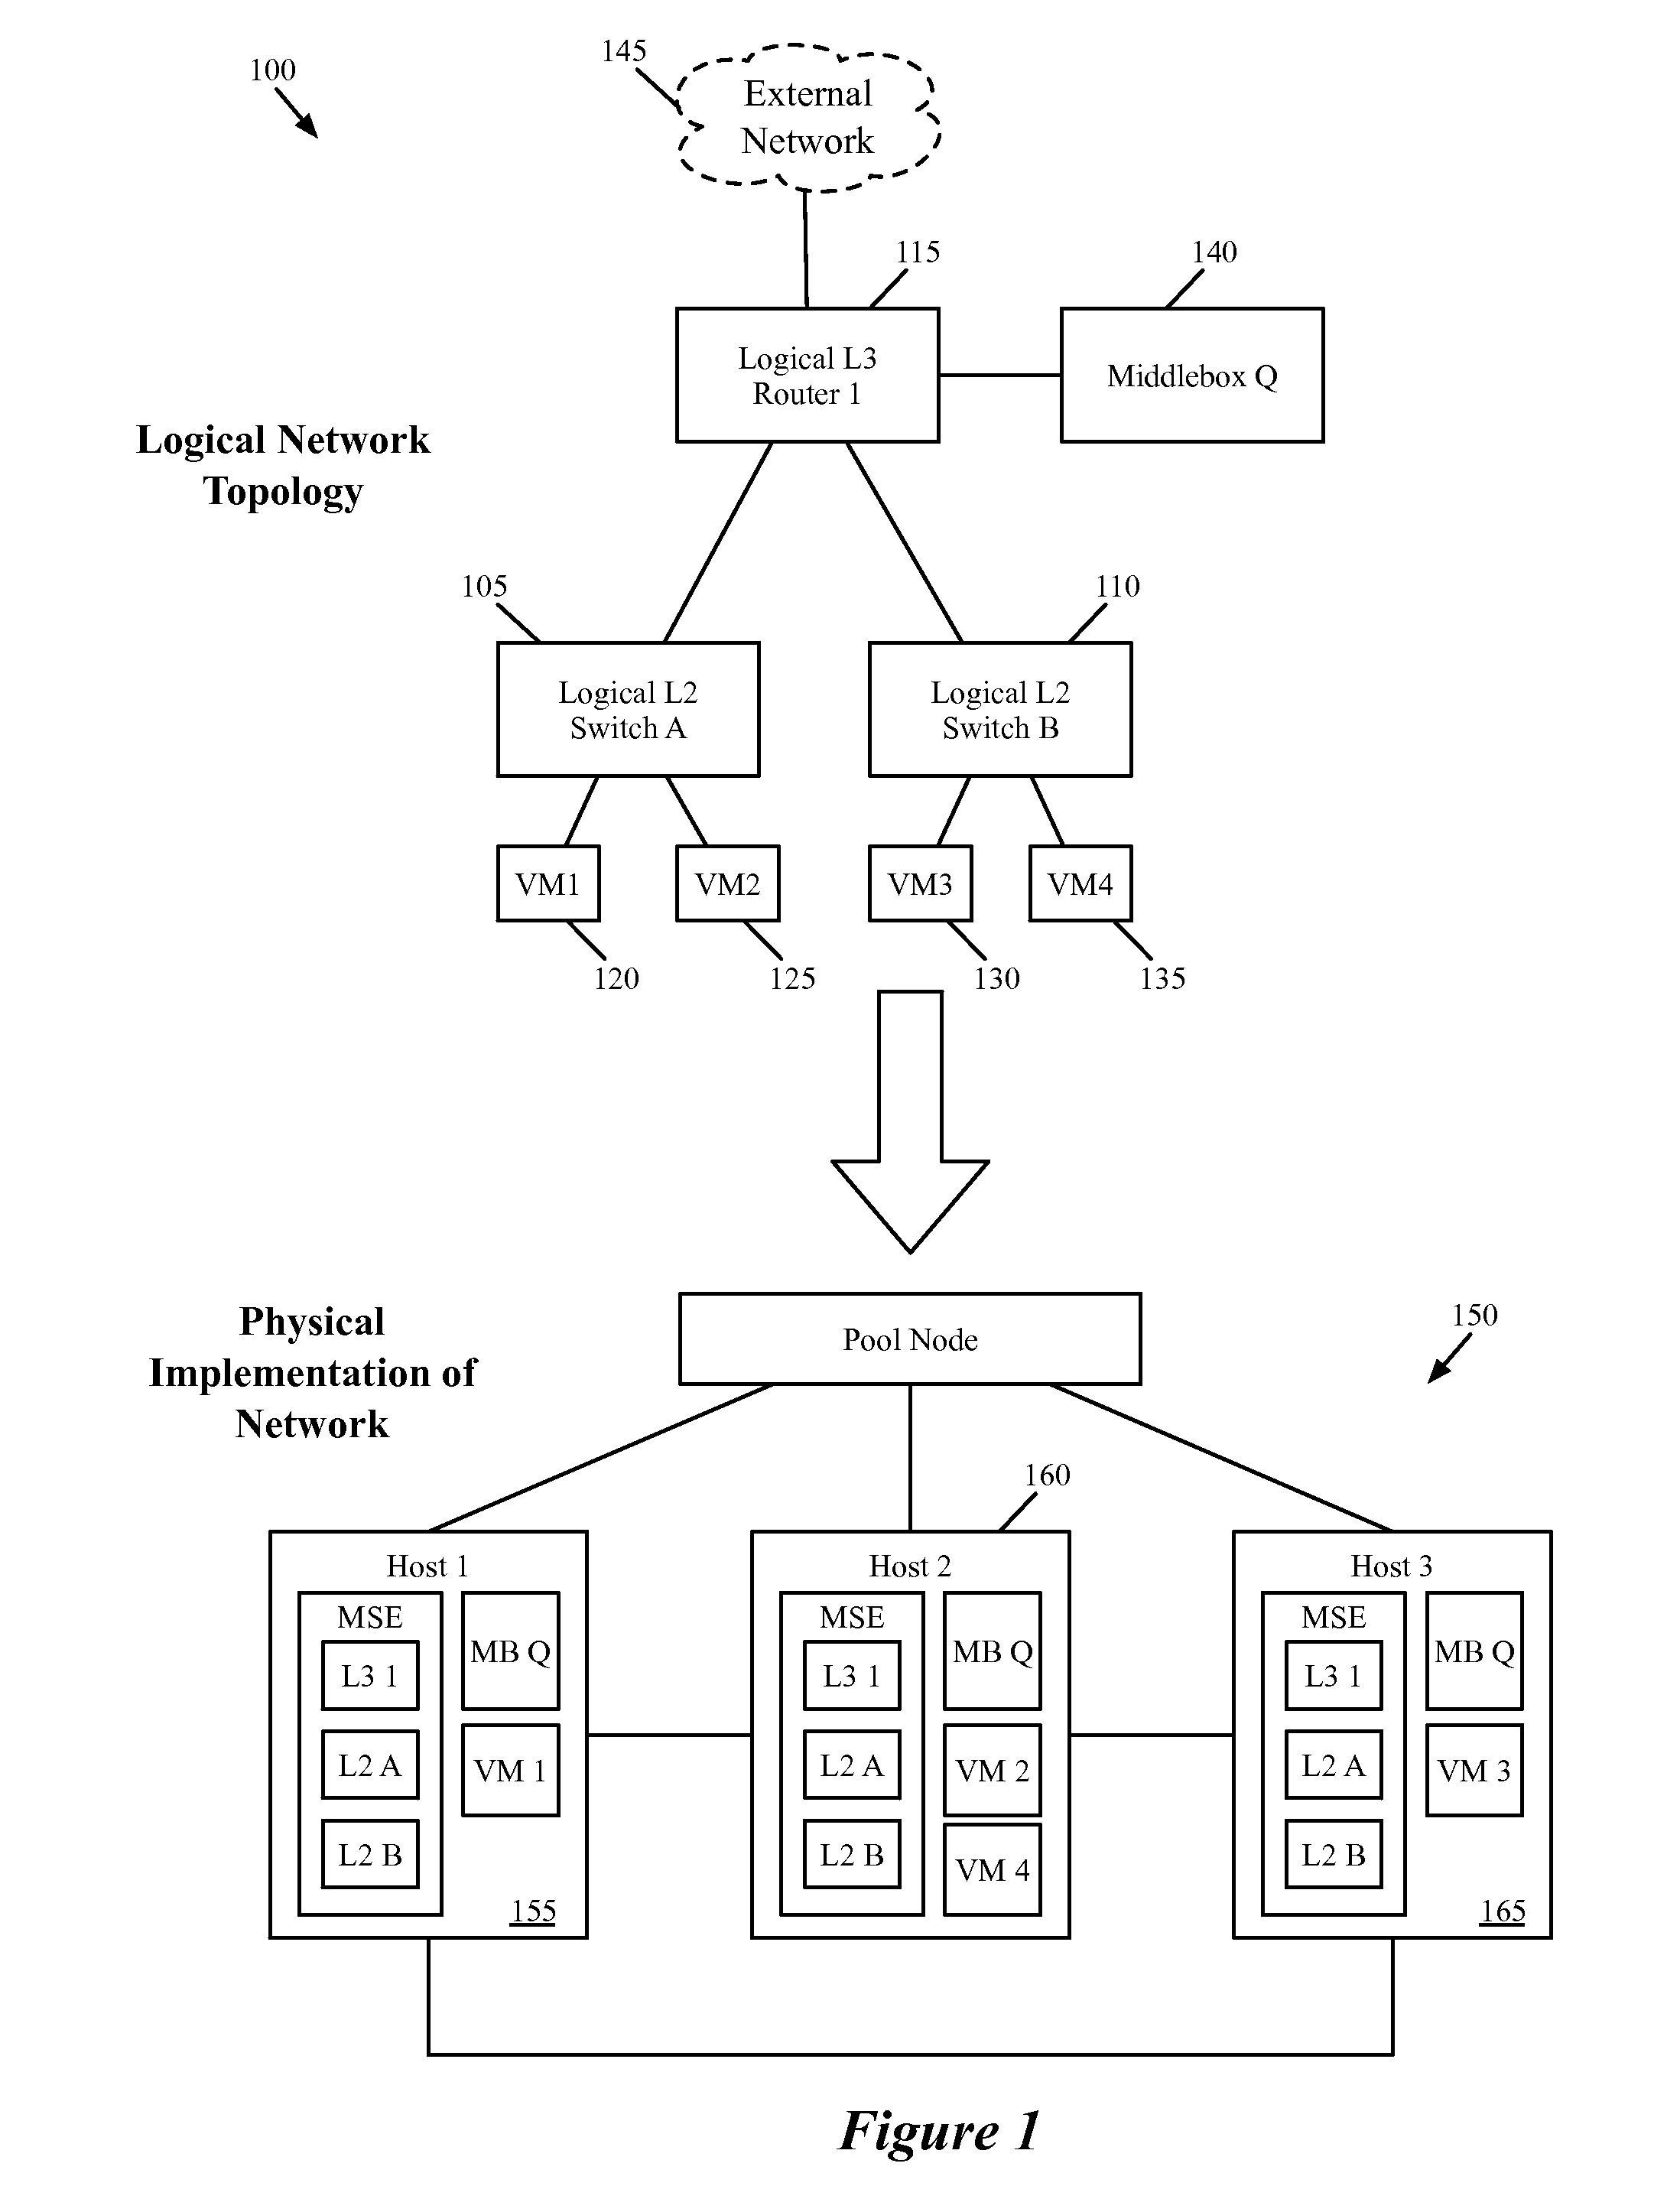 Network control system for configuring middleboxes